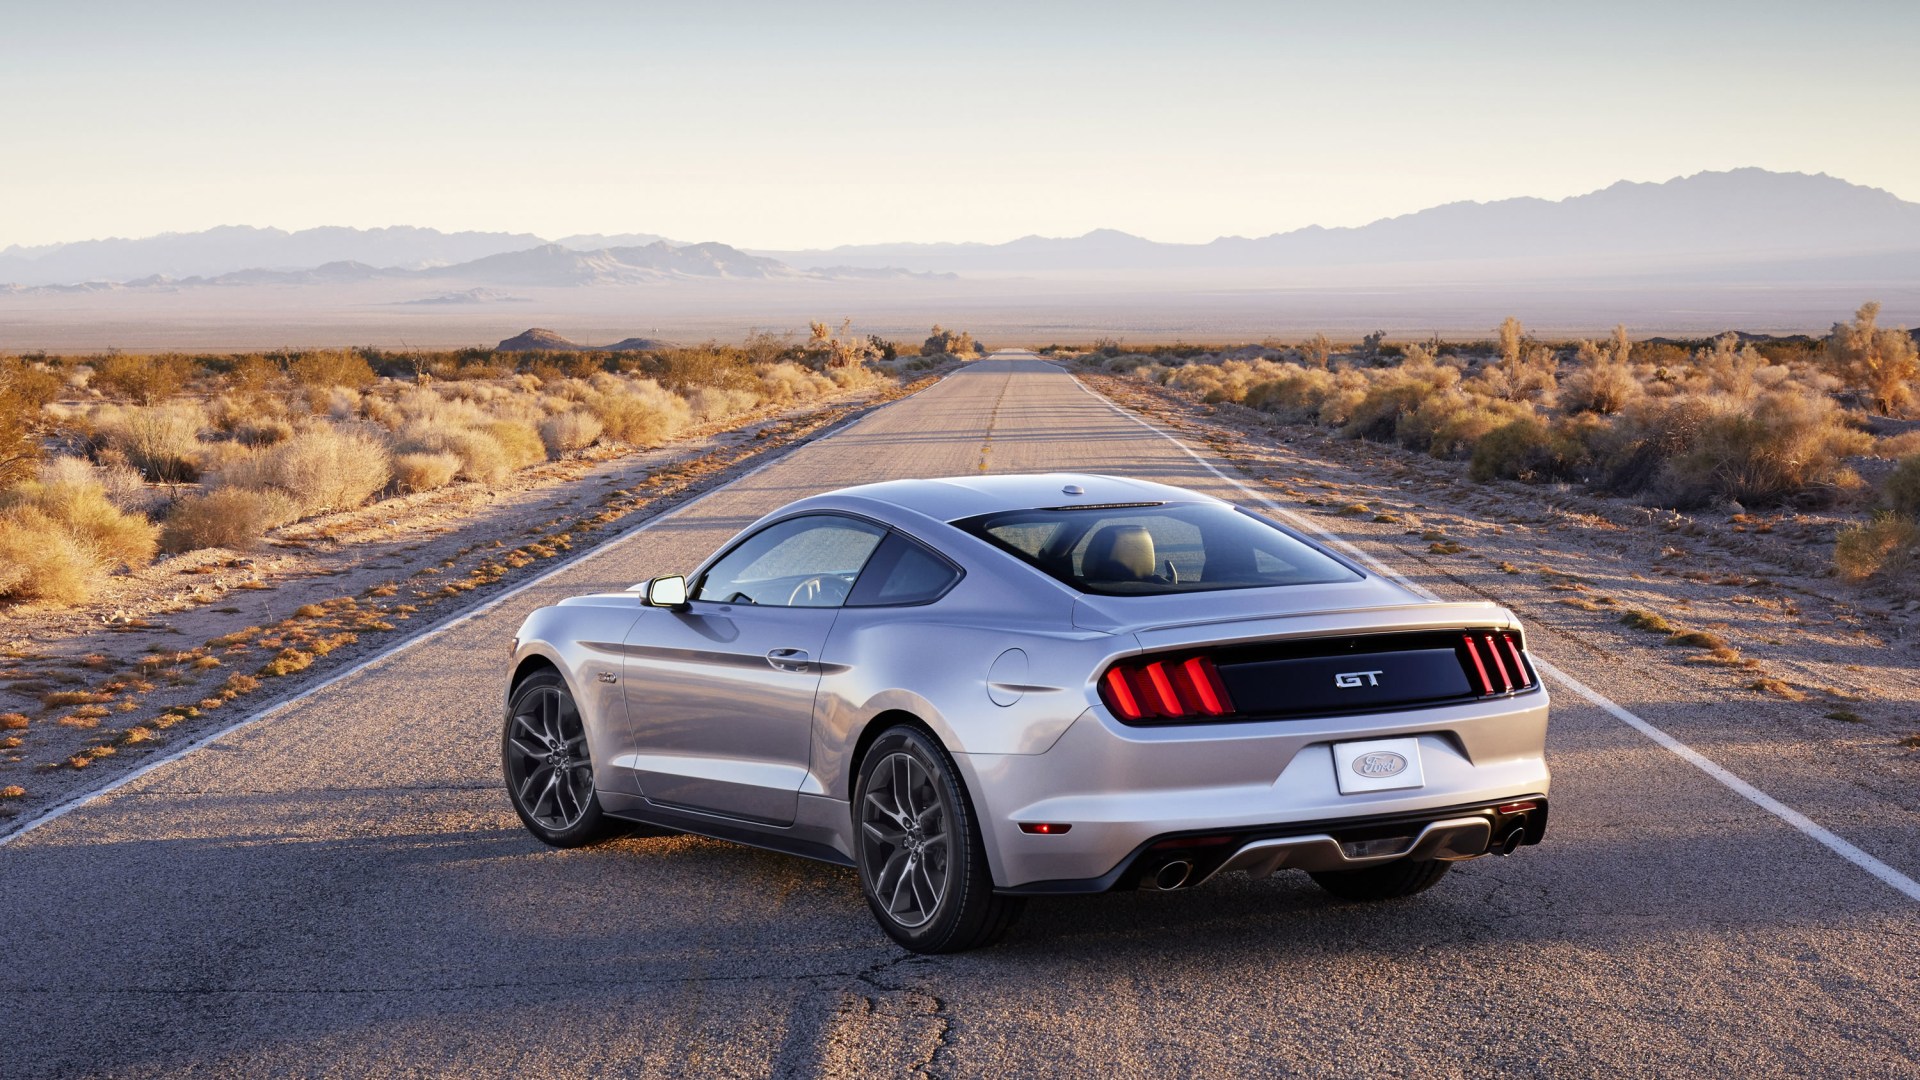 Ford Mustang 2016 Silver - HD Wallpaper 